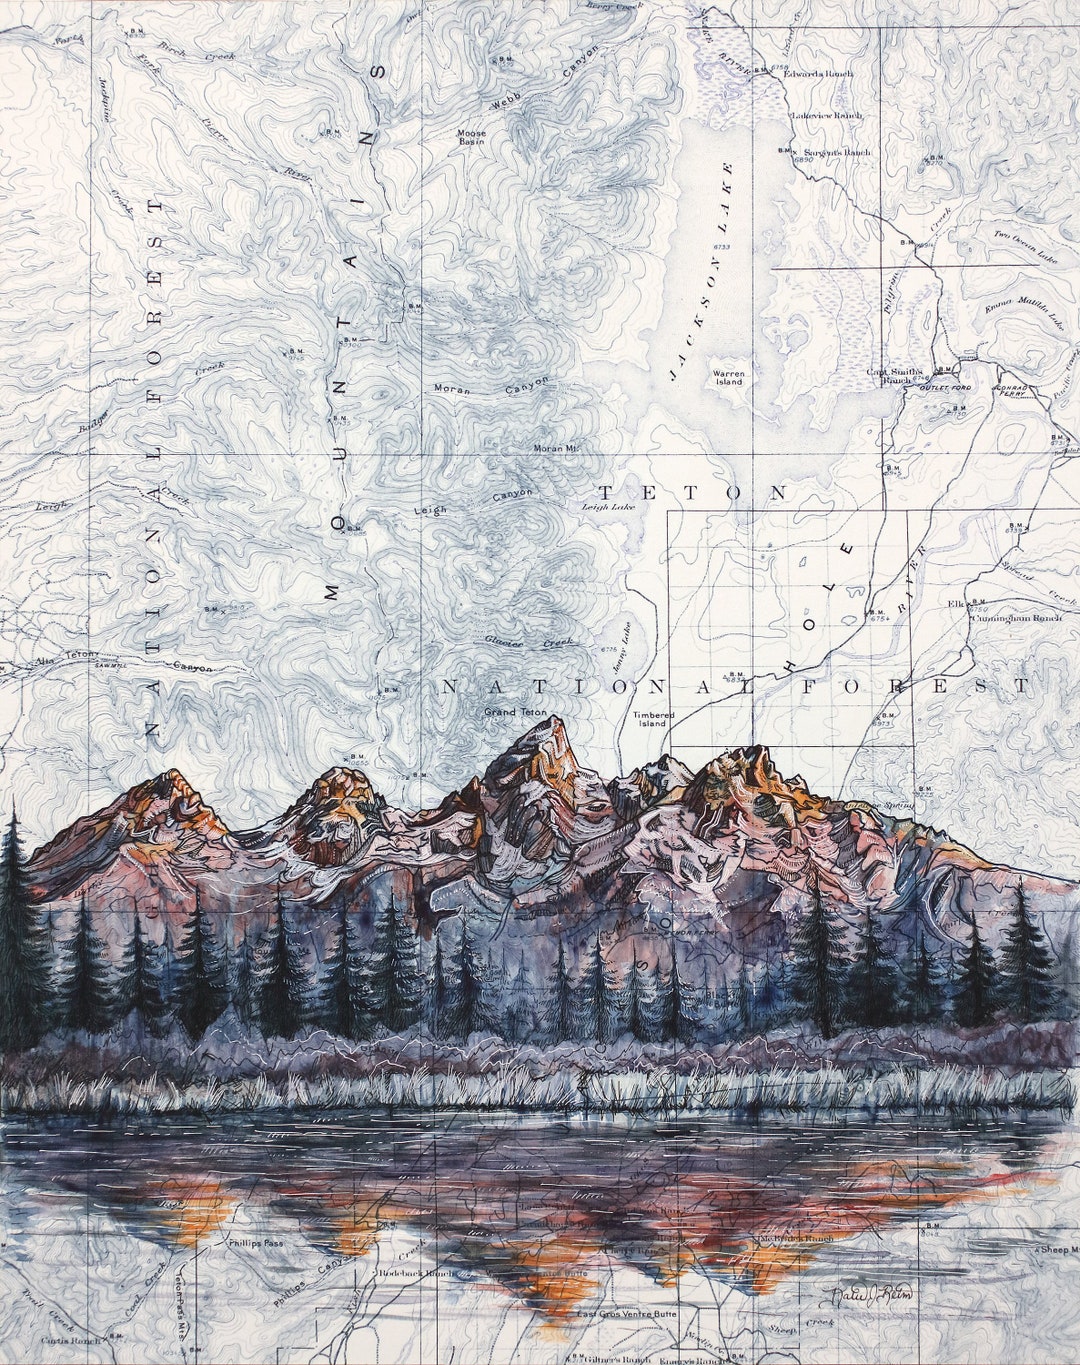 Grand Teton National Park Hand-Drawn Map Poster - Authentic 18x24